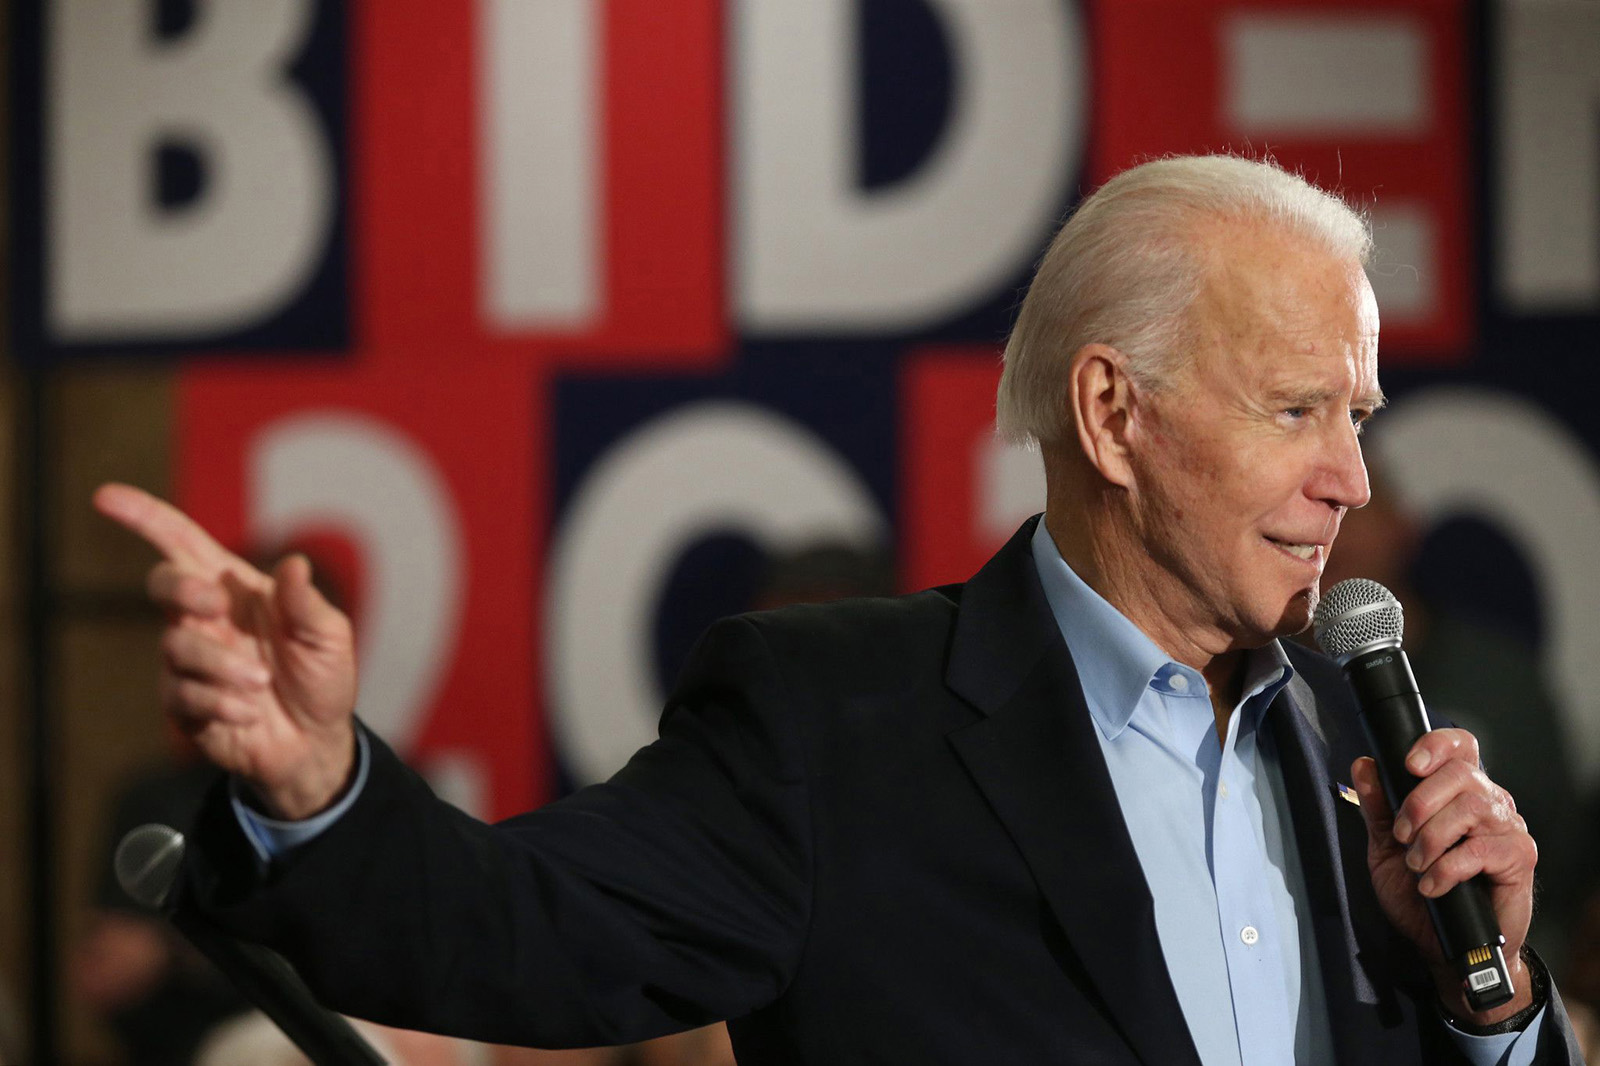 From veepstakes to Cabinet? Where Biden's running mate contenders might land if he wins